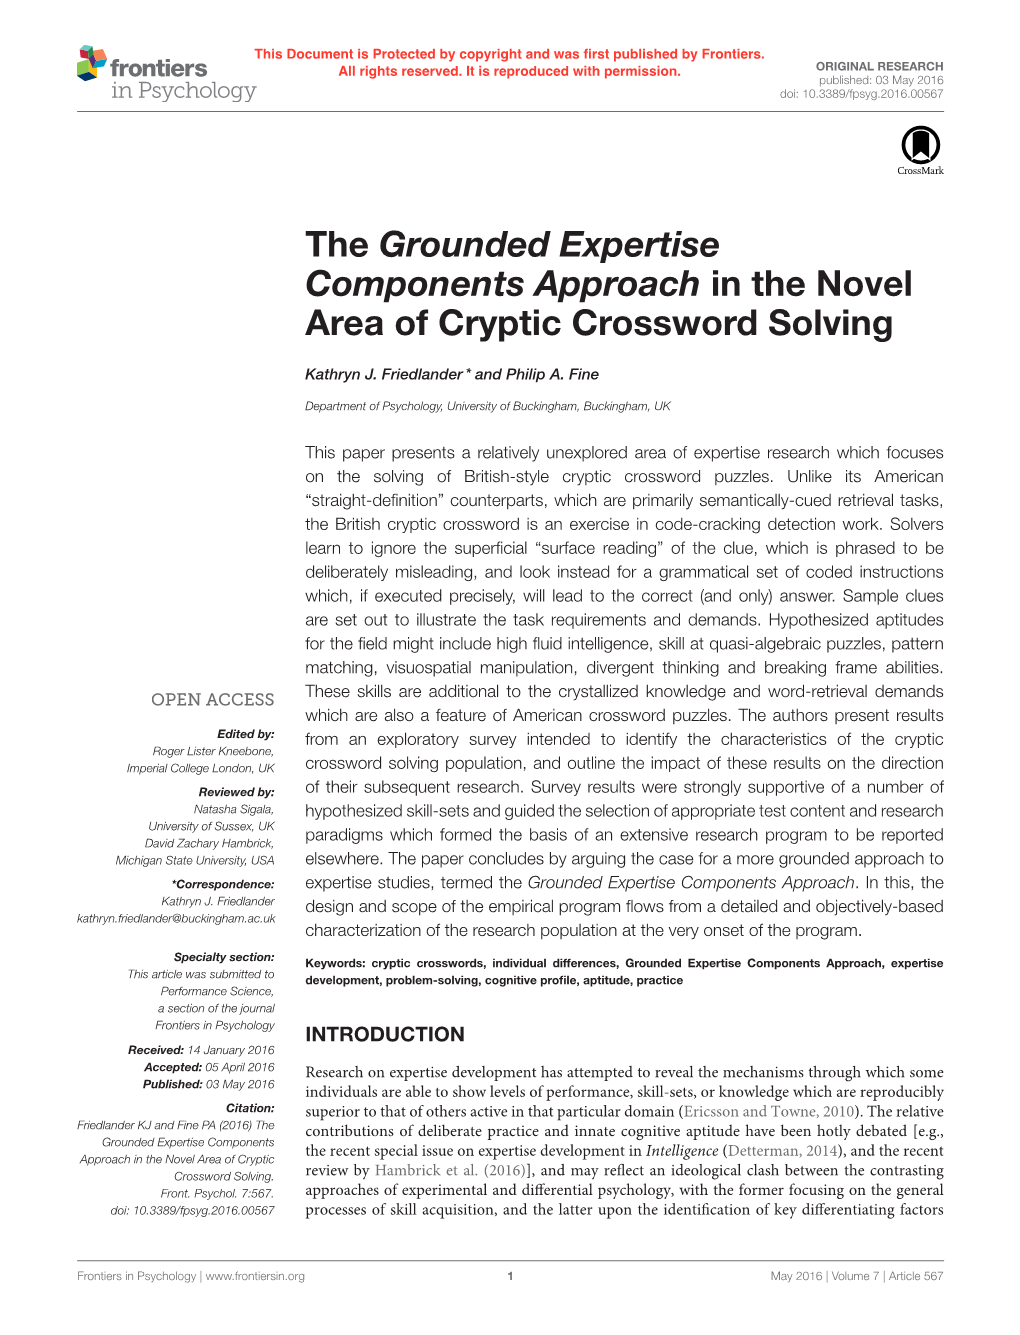 The Grounded Expertise Components Approach in the Novel Area of Cryptic Crossword Solving